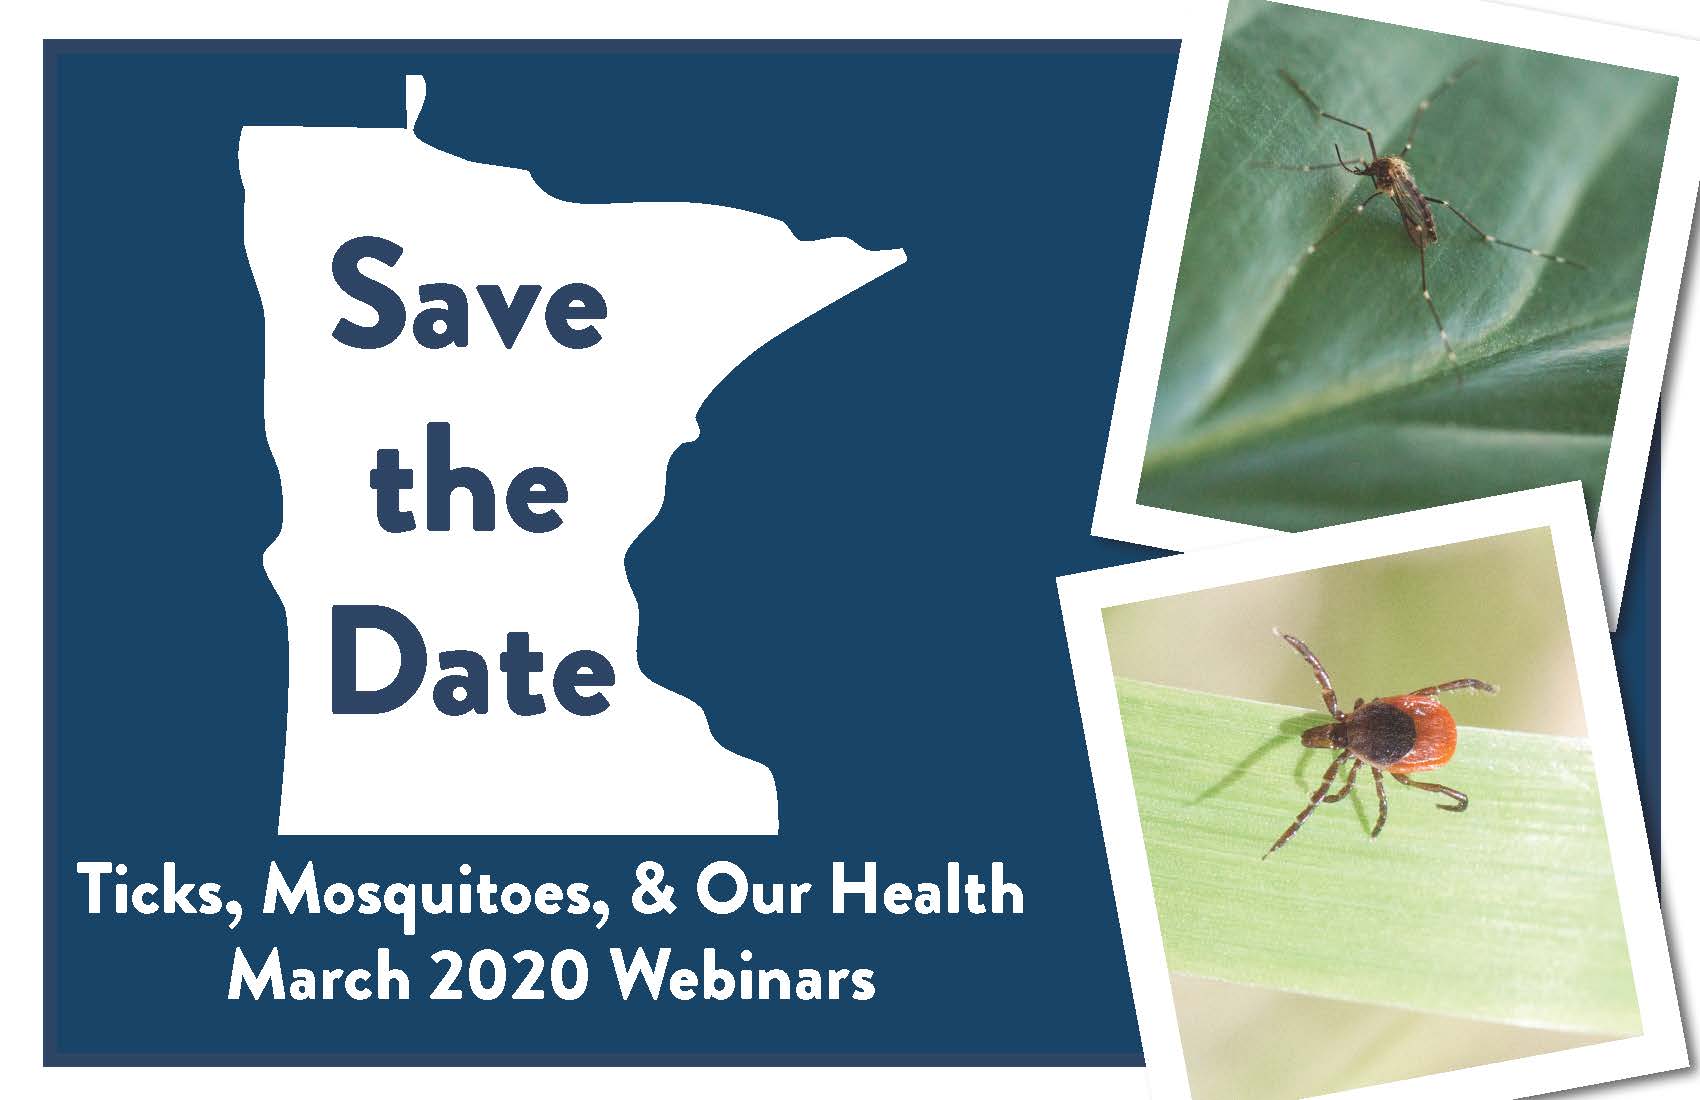 Tick, Mosquitoes and Our Health Webinars Save The Date